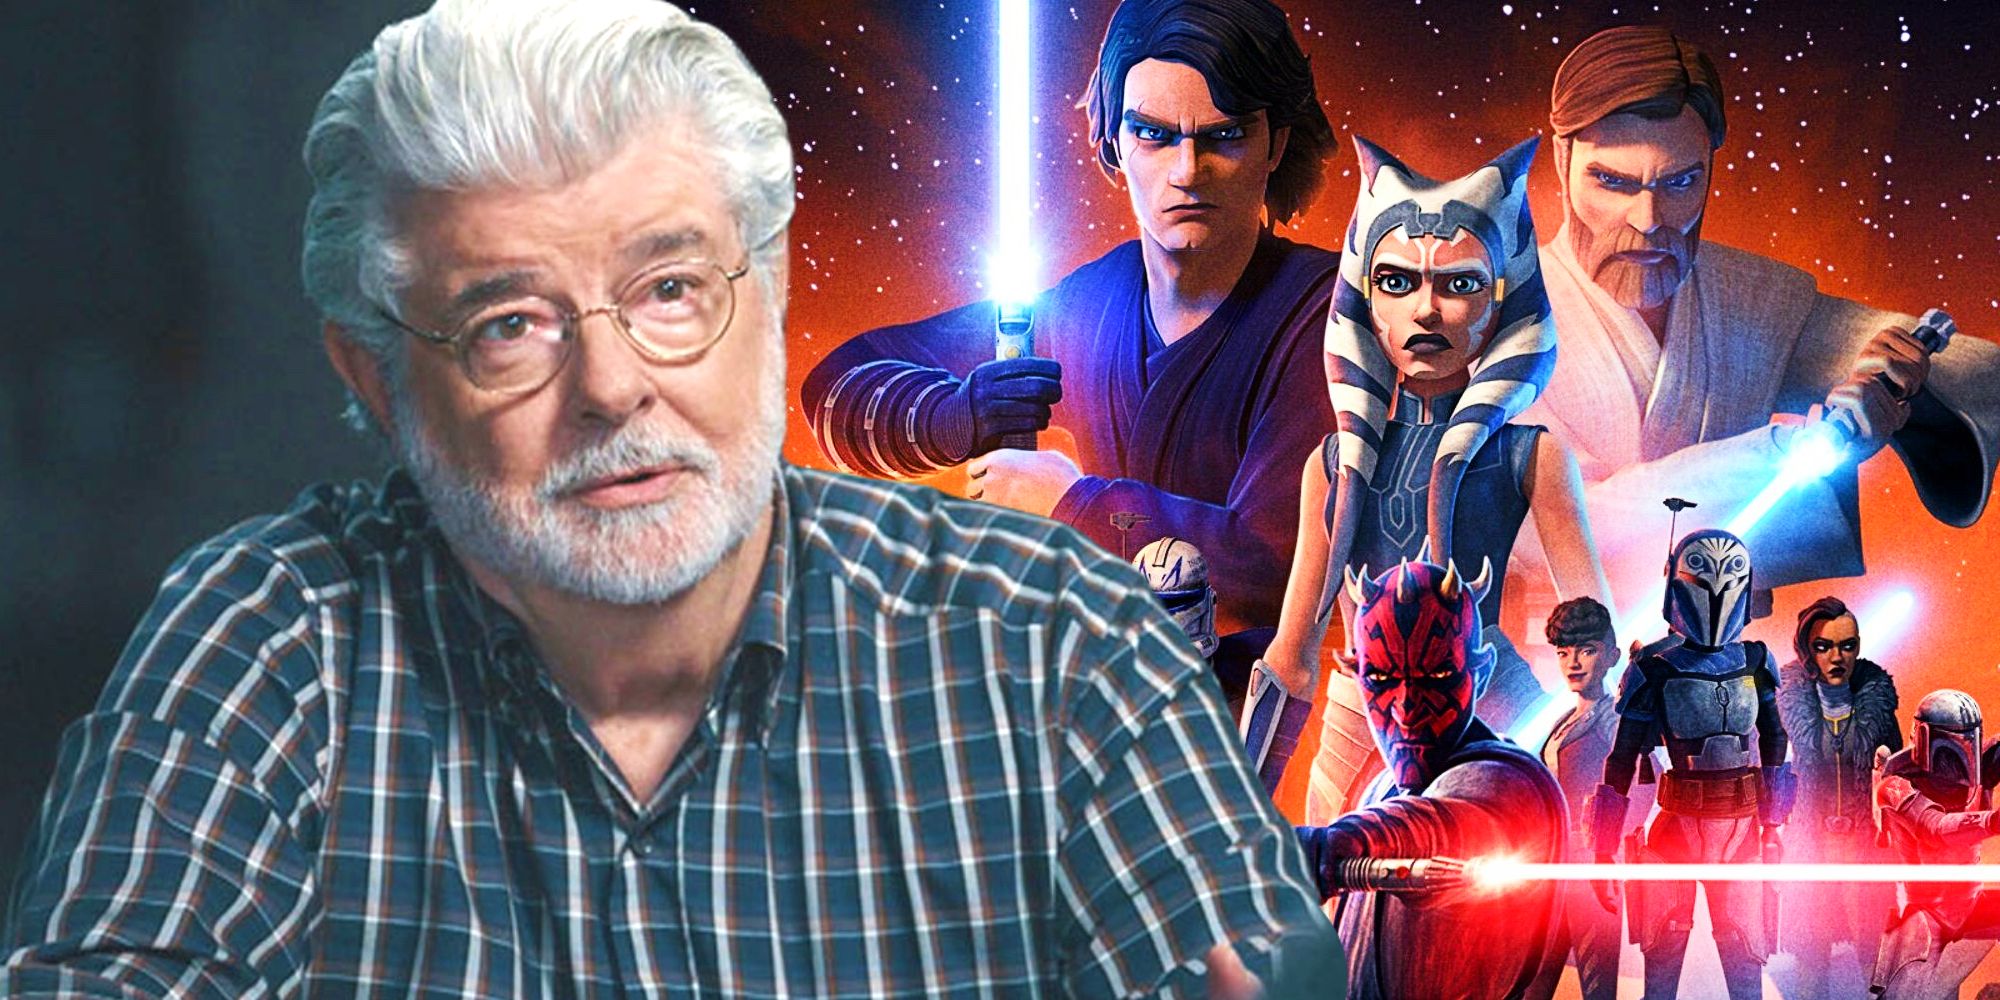 George Lucas and Star Wars The Clone Wars